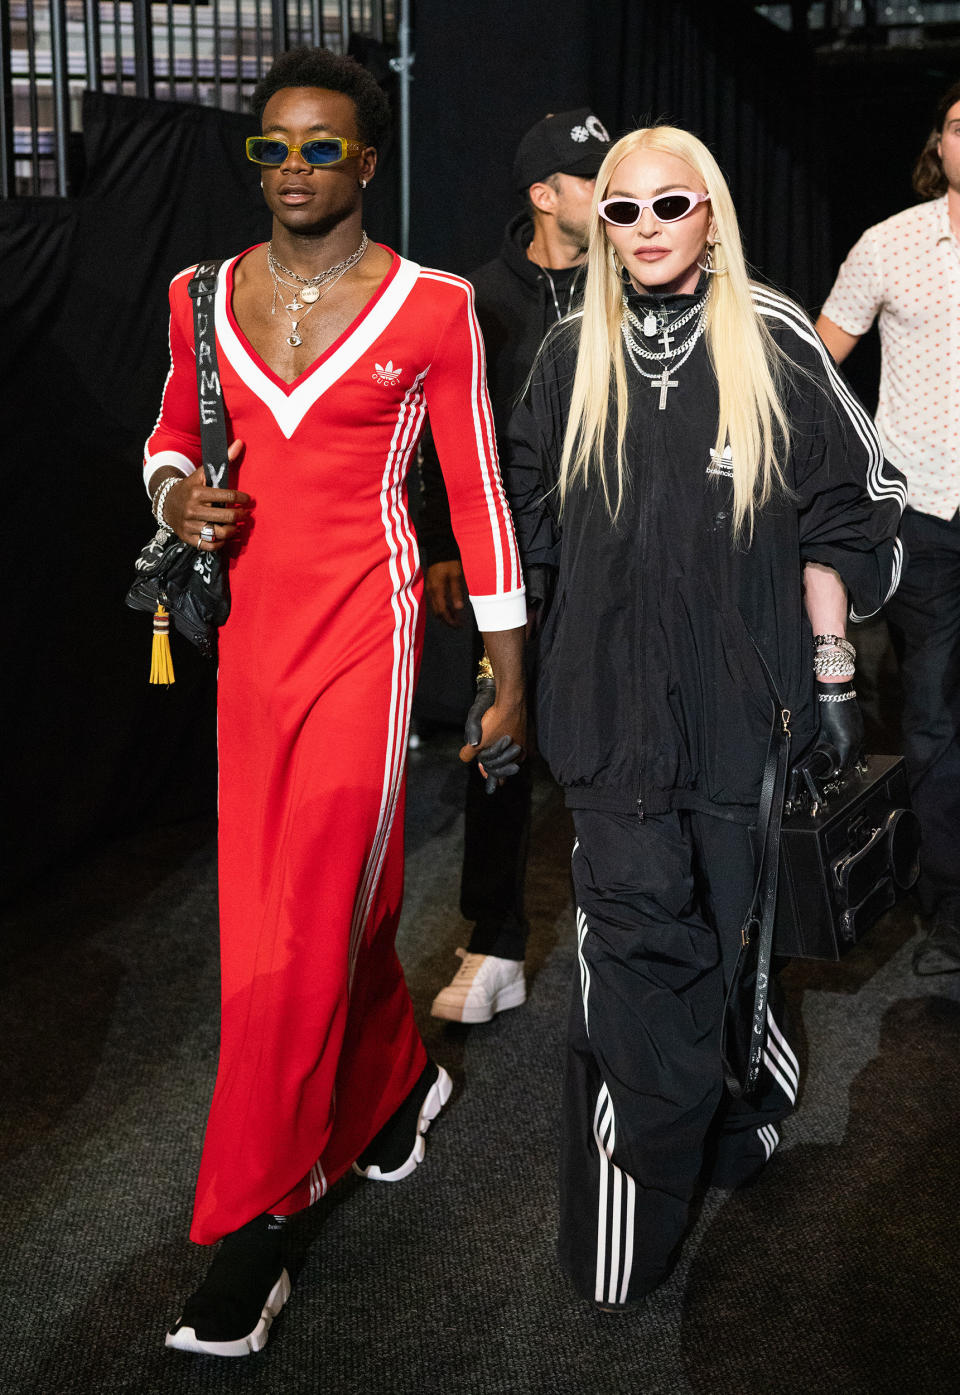 David Banda and Madonna on May 28, 2022 in New York City. (Photo by Cassy Athena/Getty Images) (Cassy Athena / Getty Images)